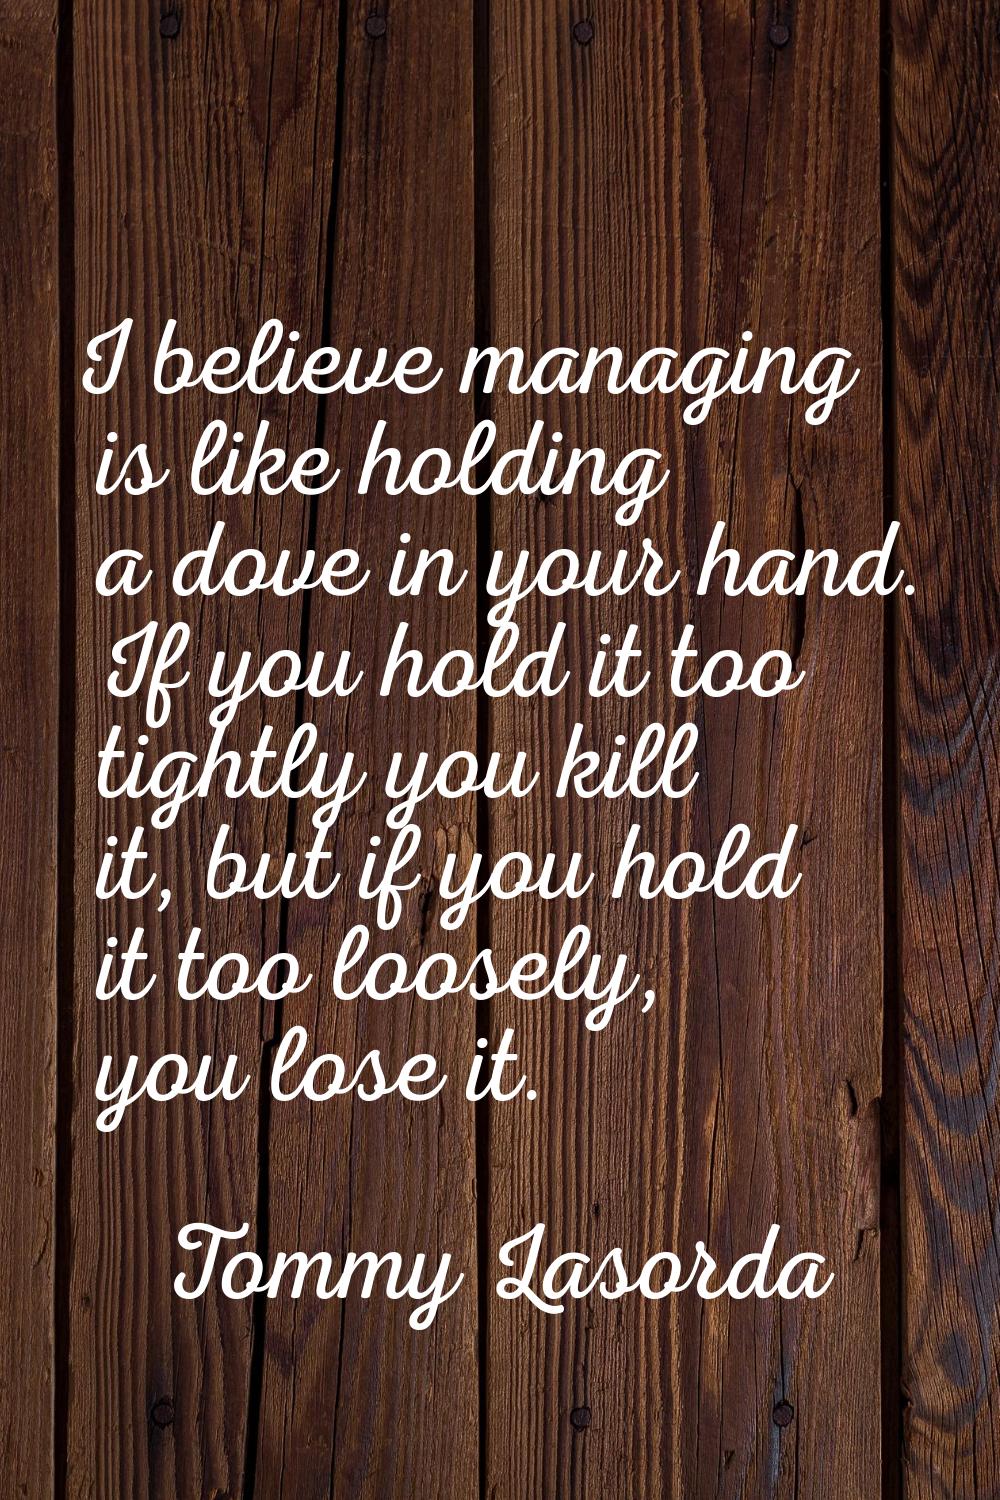 I believe managing is like holding a dove in your hand. If you hold it too tightly you kill it, but